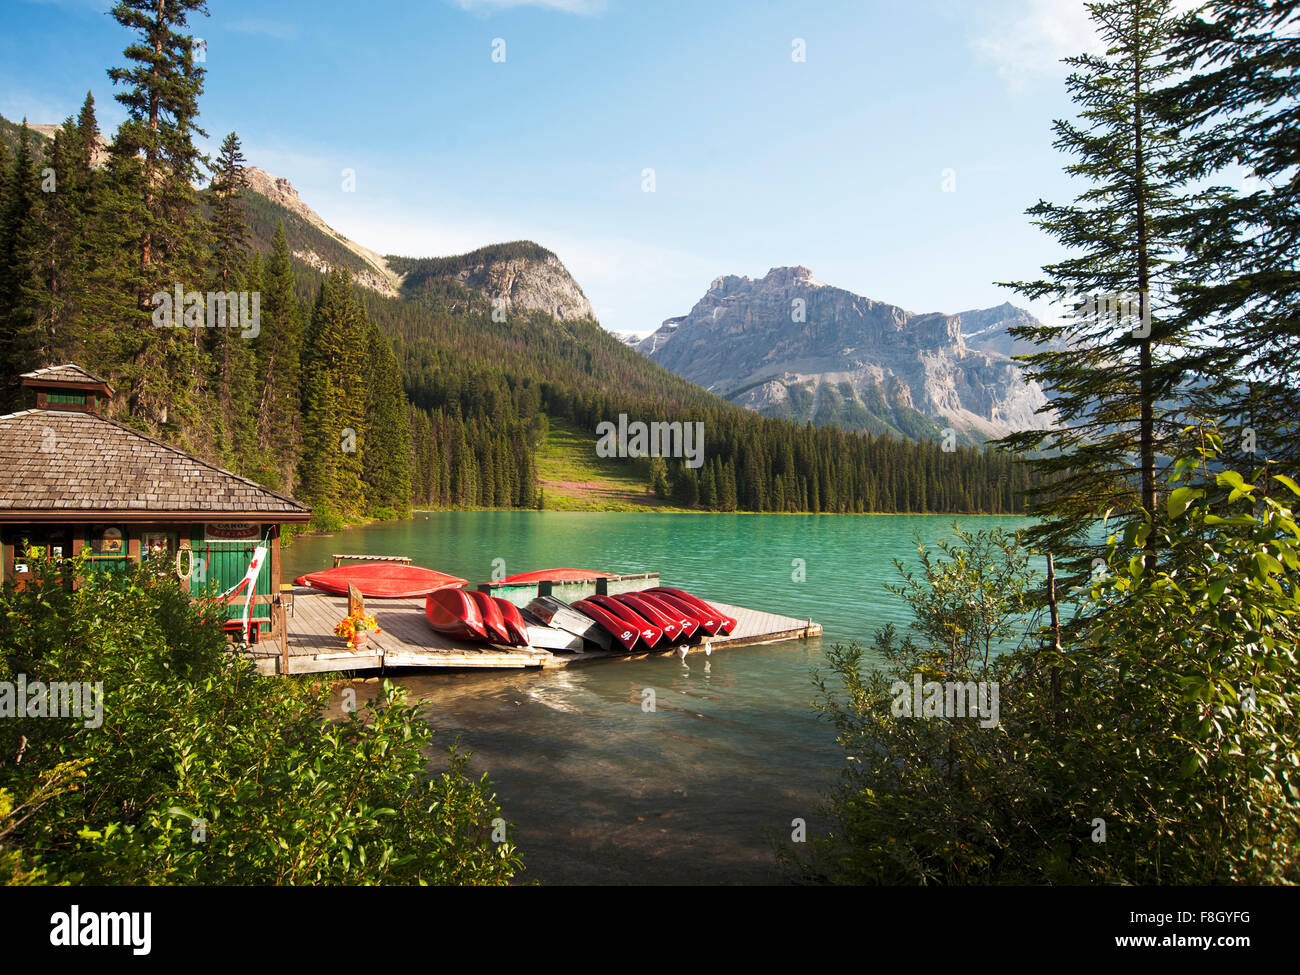 Canoes on wooden dock in rural lake Stock Photo